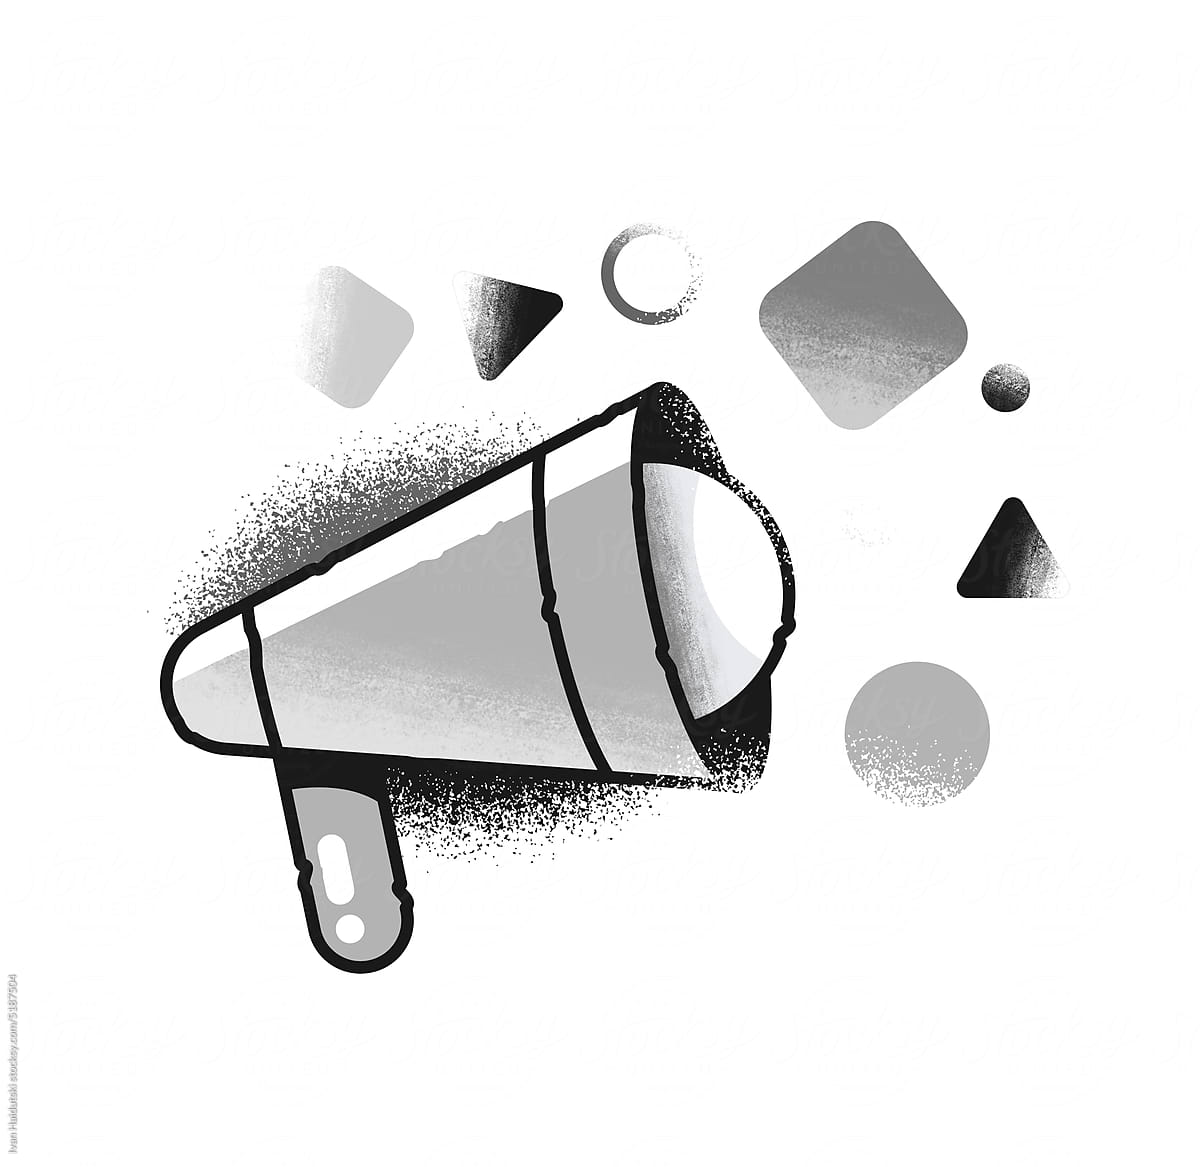 Black and white Loudspeaker illustration. \
Engaging with media.